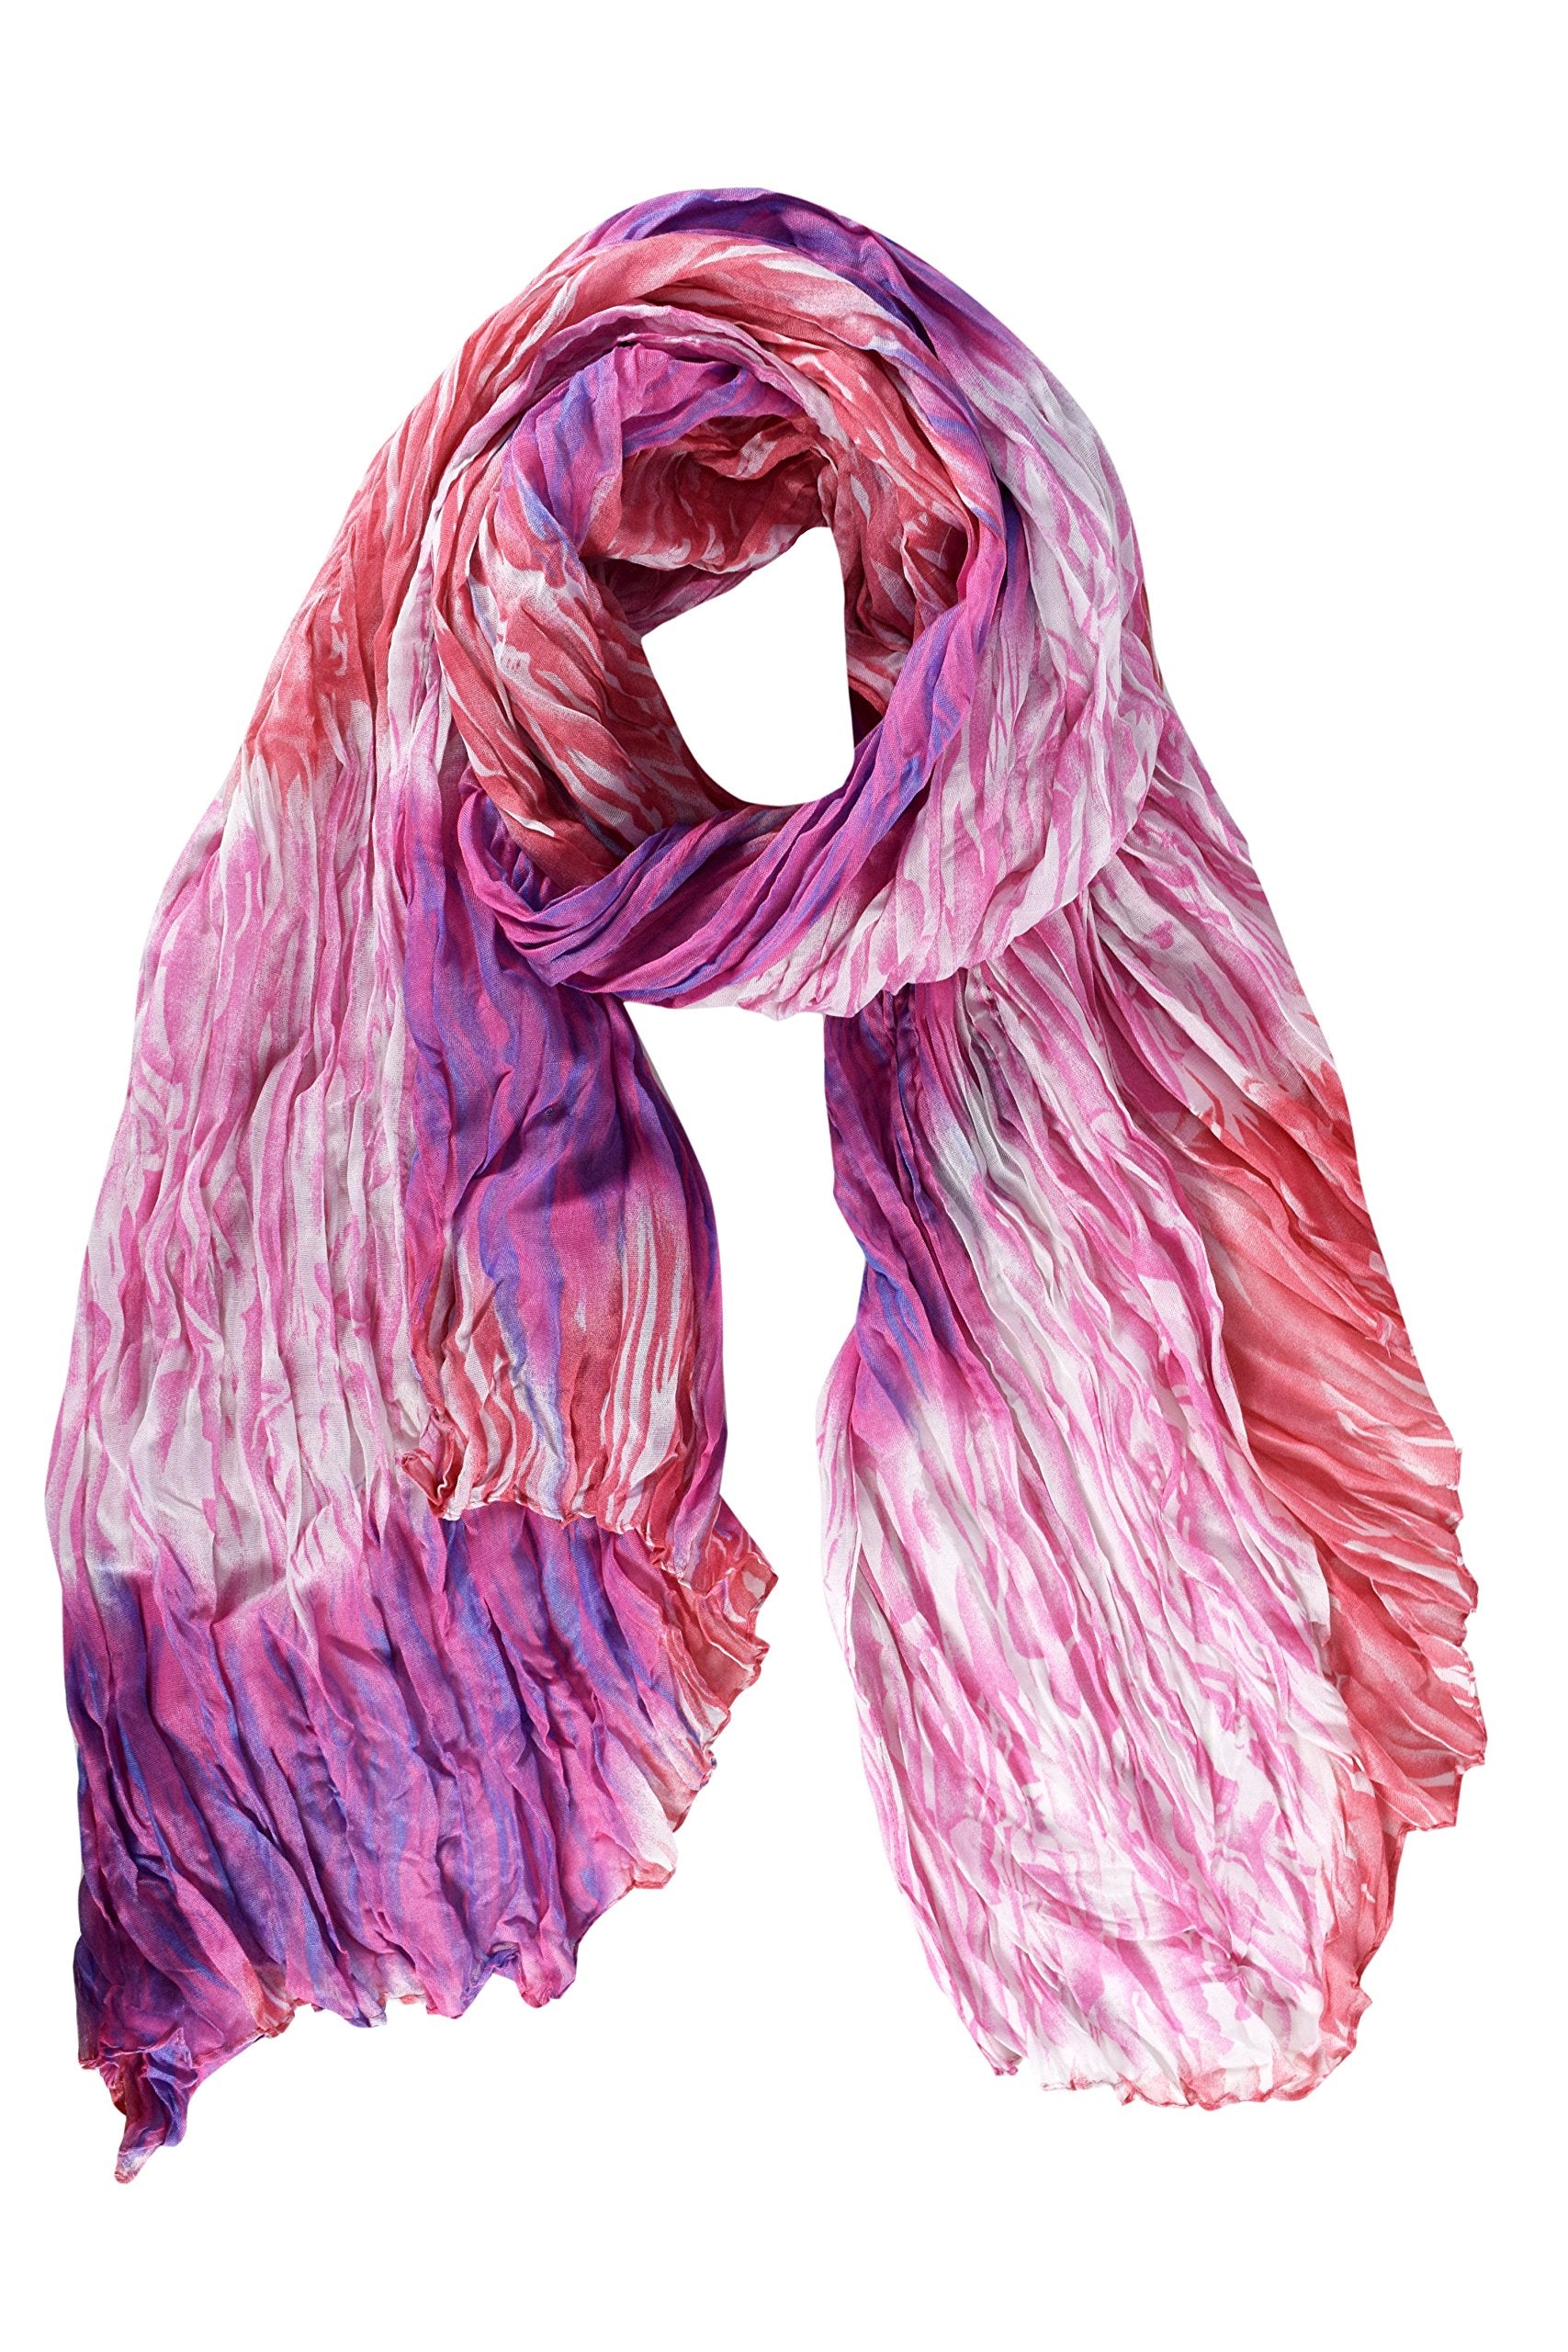 Women's Stylish Trendy Lightweight Crinkled Faded Tie Dye Scarf Sarong